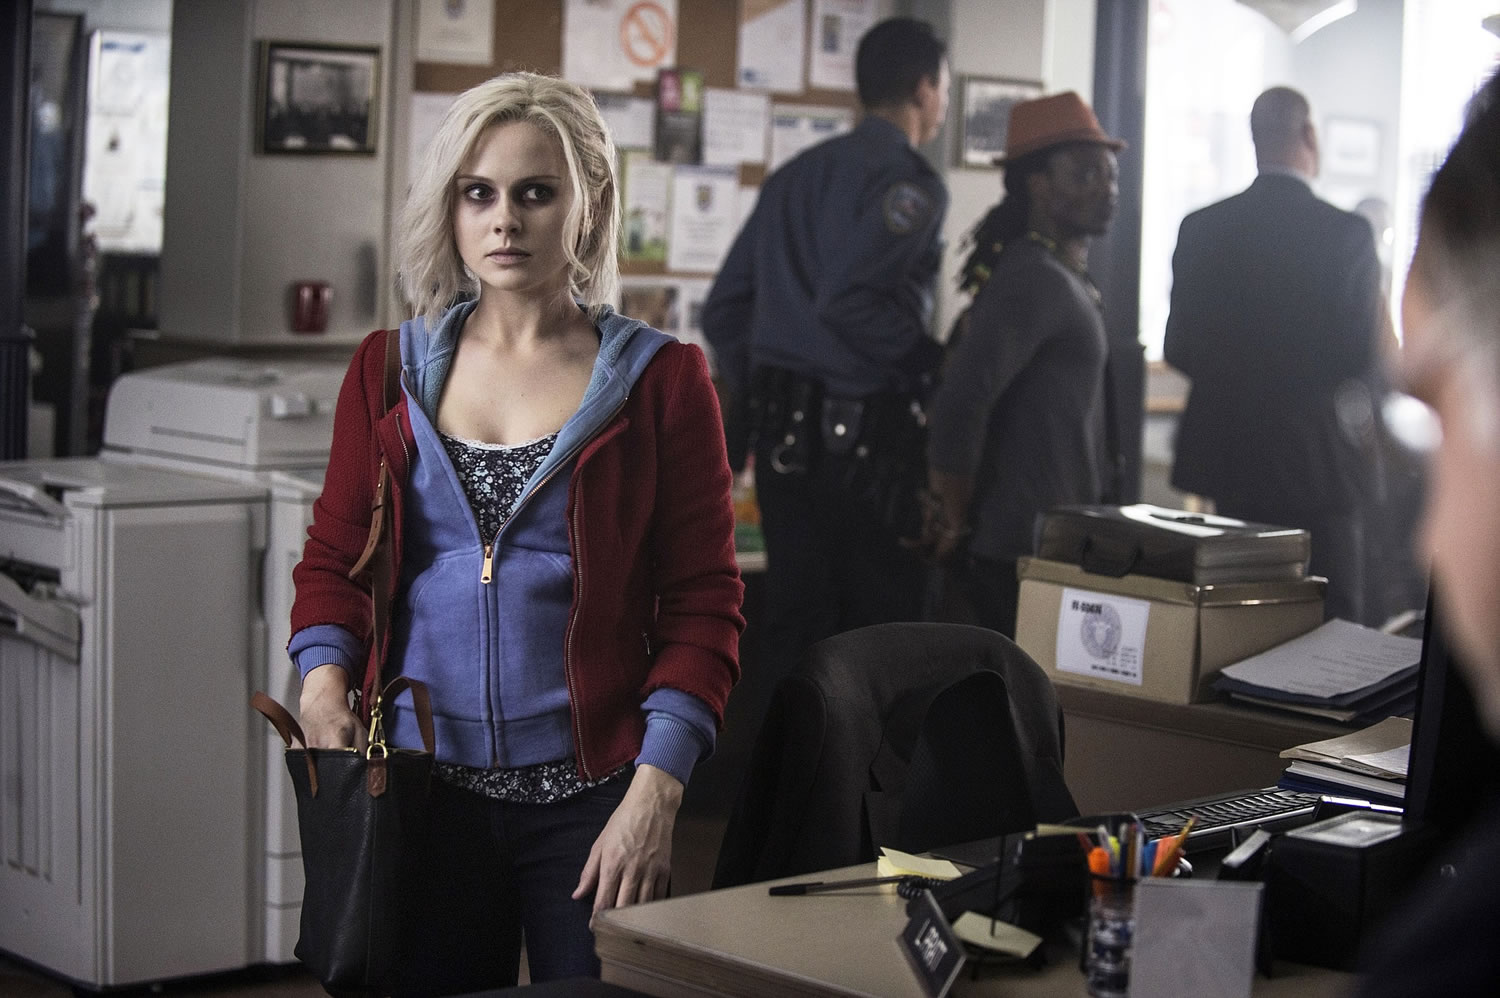 Rose McIver stars as Olivia &quot;Liv&quot; Moore in the pilot for the television series &quot;iZombie.&quot; McIver plays a medical student-turned-zombie in her new show, which premiered Tuesday on The CW.